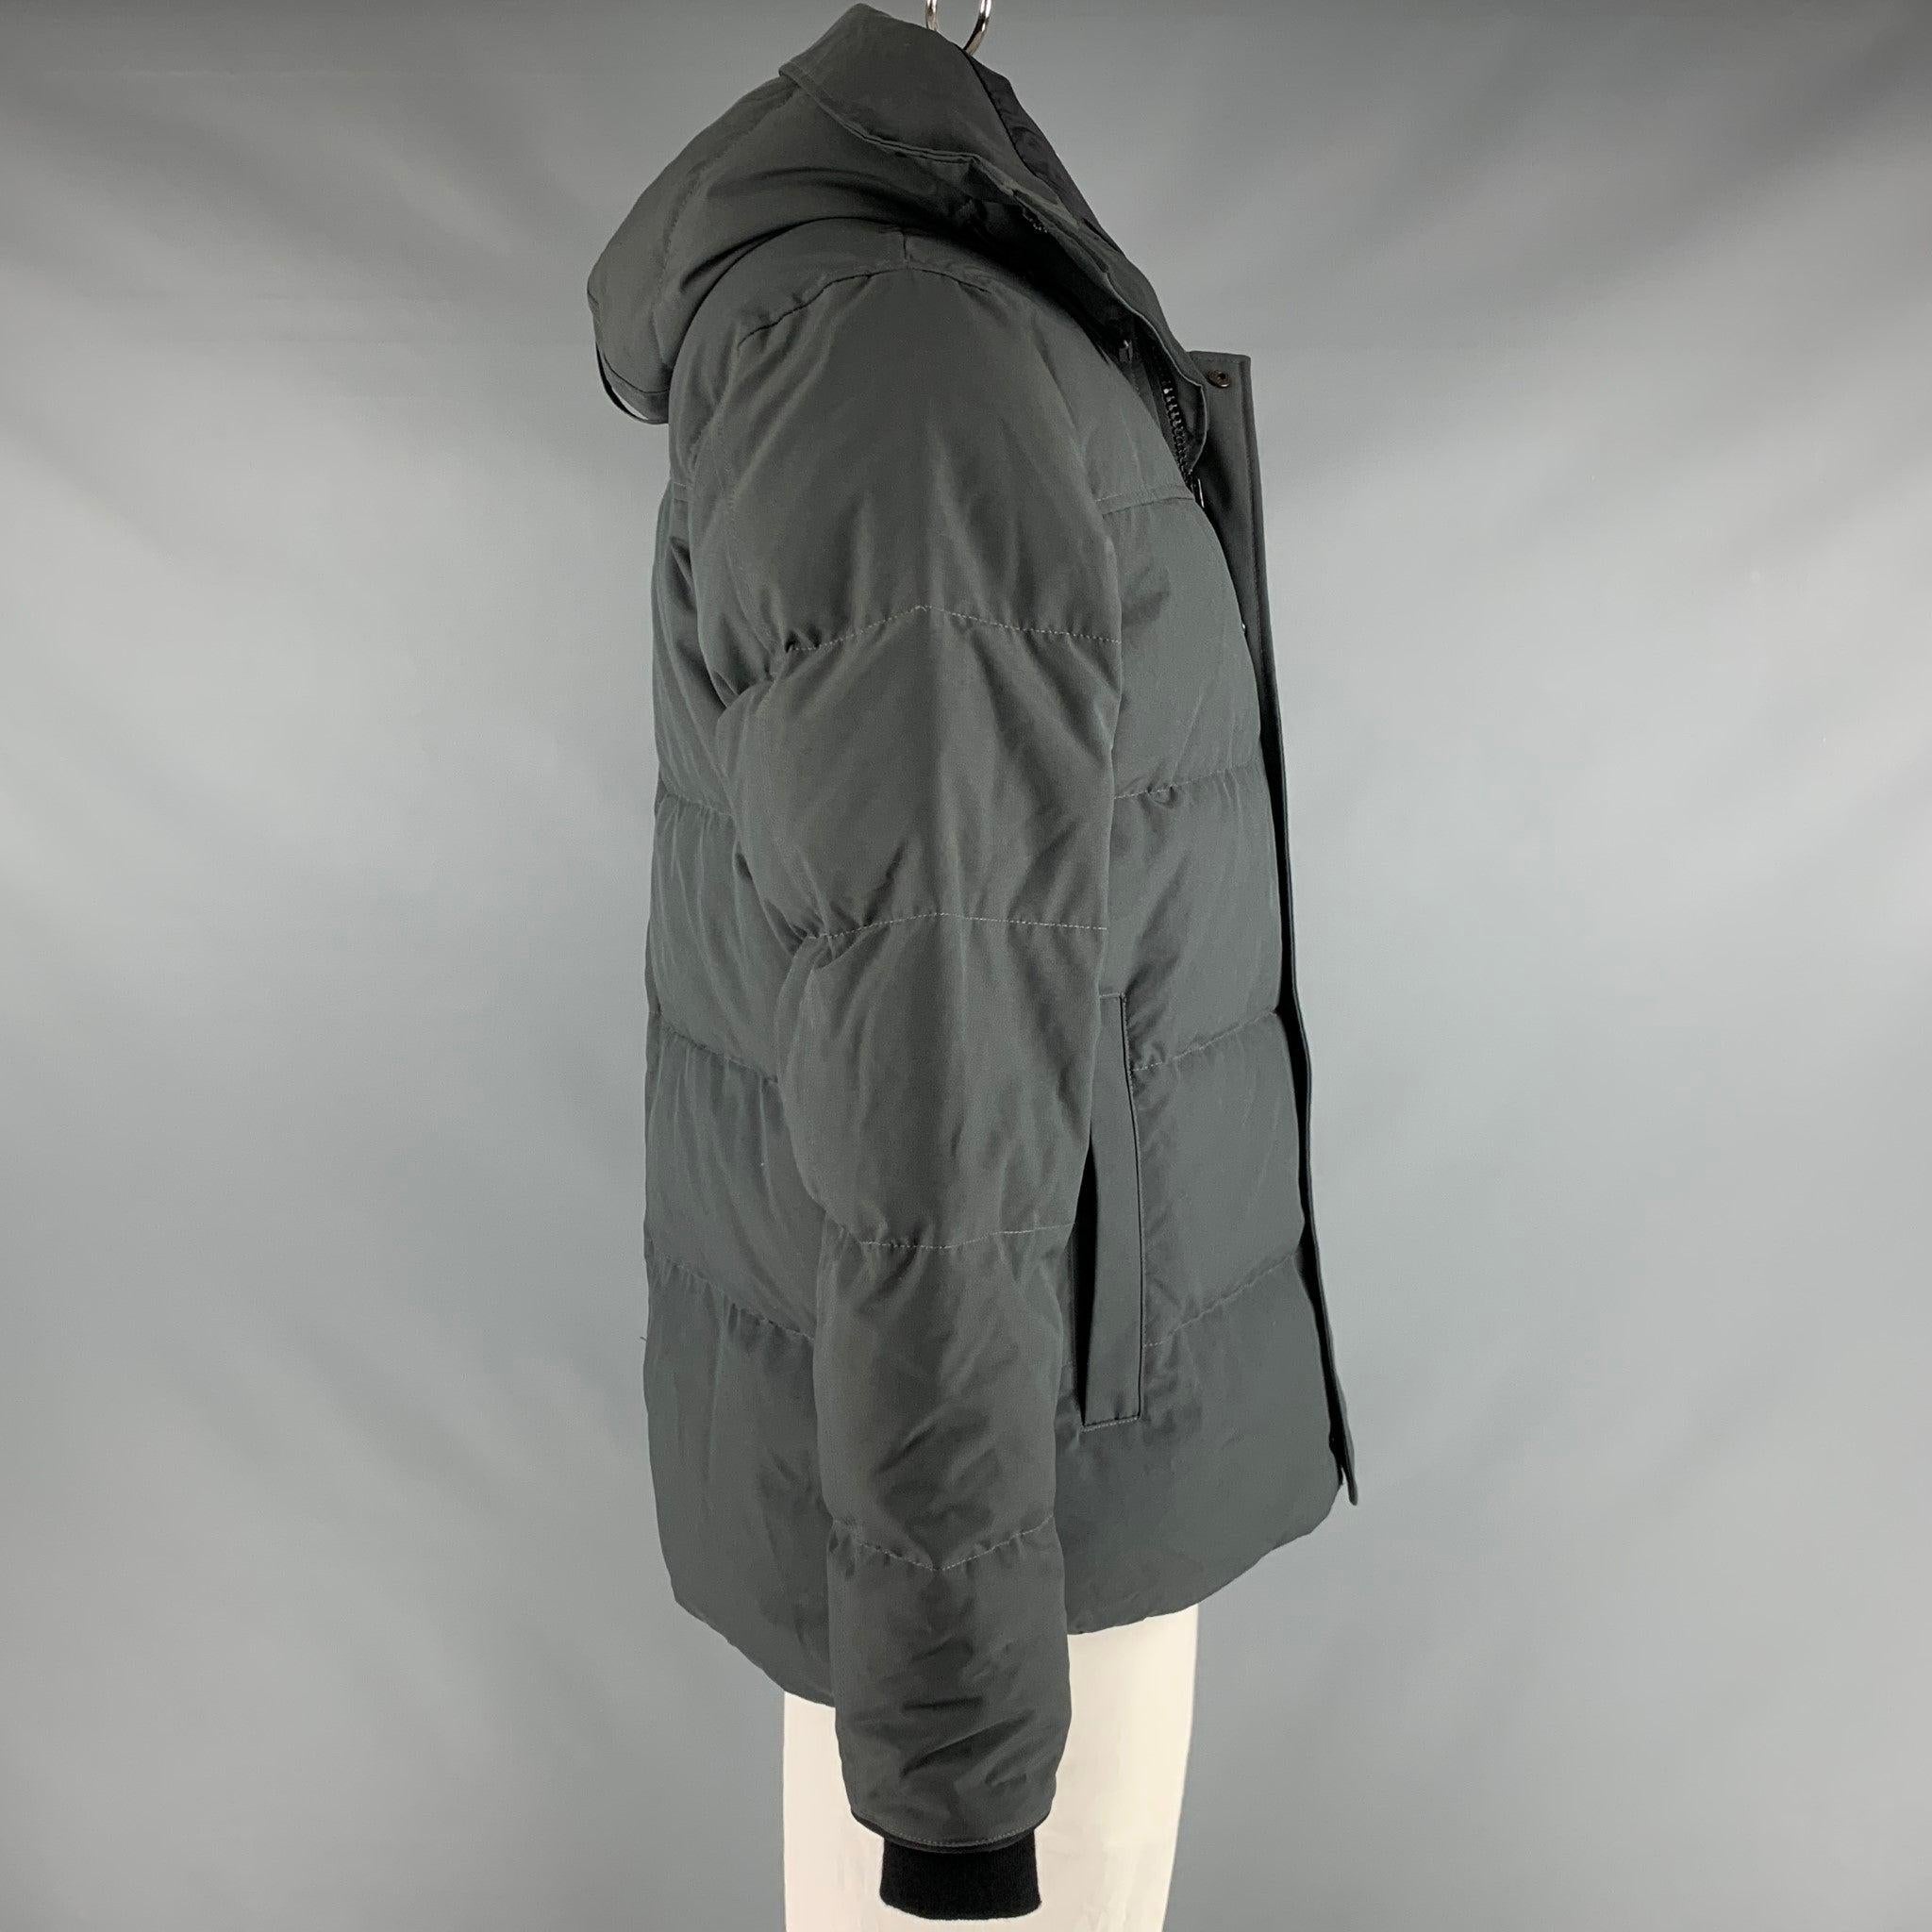 CANADA GOOSE jacket
in a grey polyester cotton blend fabric featuring quilted look, cozy duck down filling, hooded style, and a zip and snap closure. Made in Canada.Very Good Pre-Owned Condition. Minor signs of wear. 

Marked:   XL 

Measurements: 
